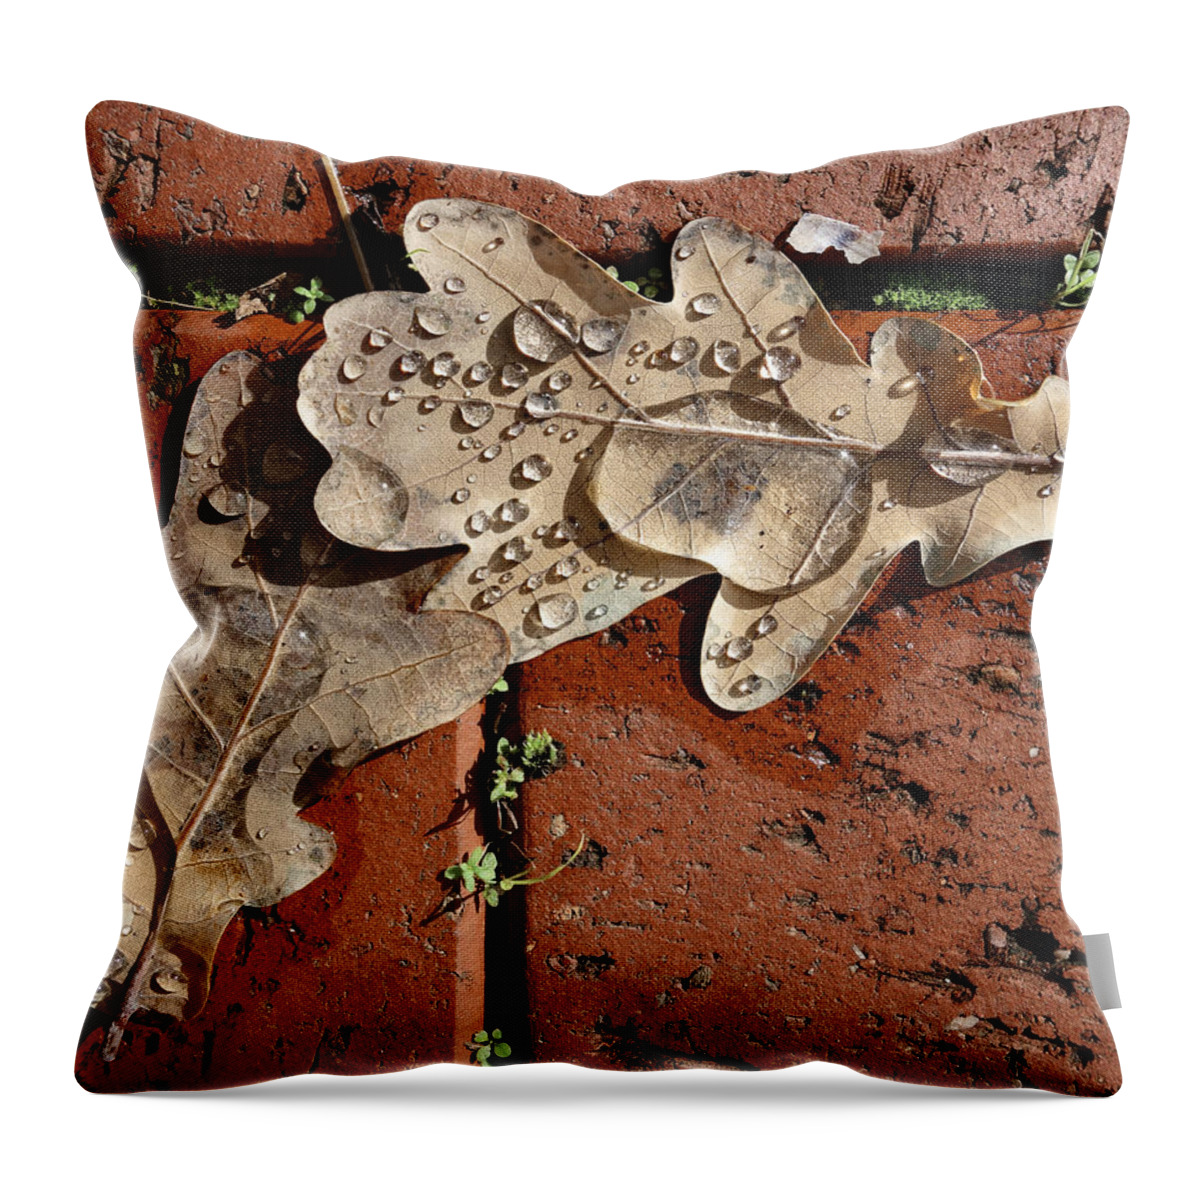 Drinking Buddies Throw Pillow featuring the photograph Drinking Buddies by Wayne Sherriff